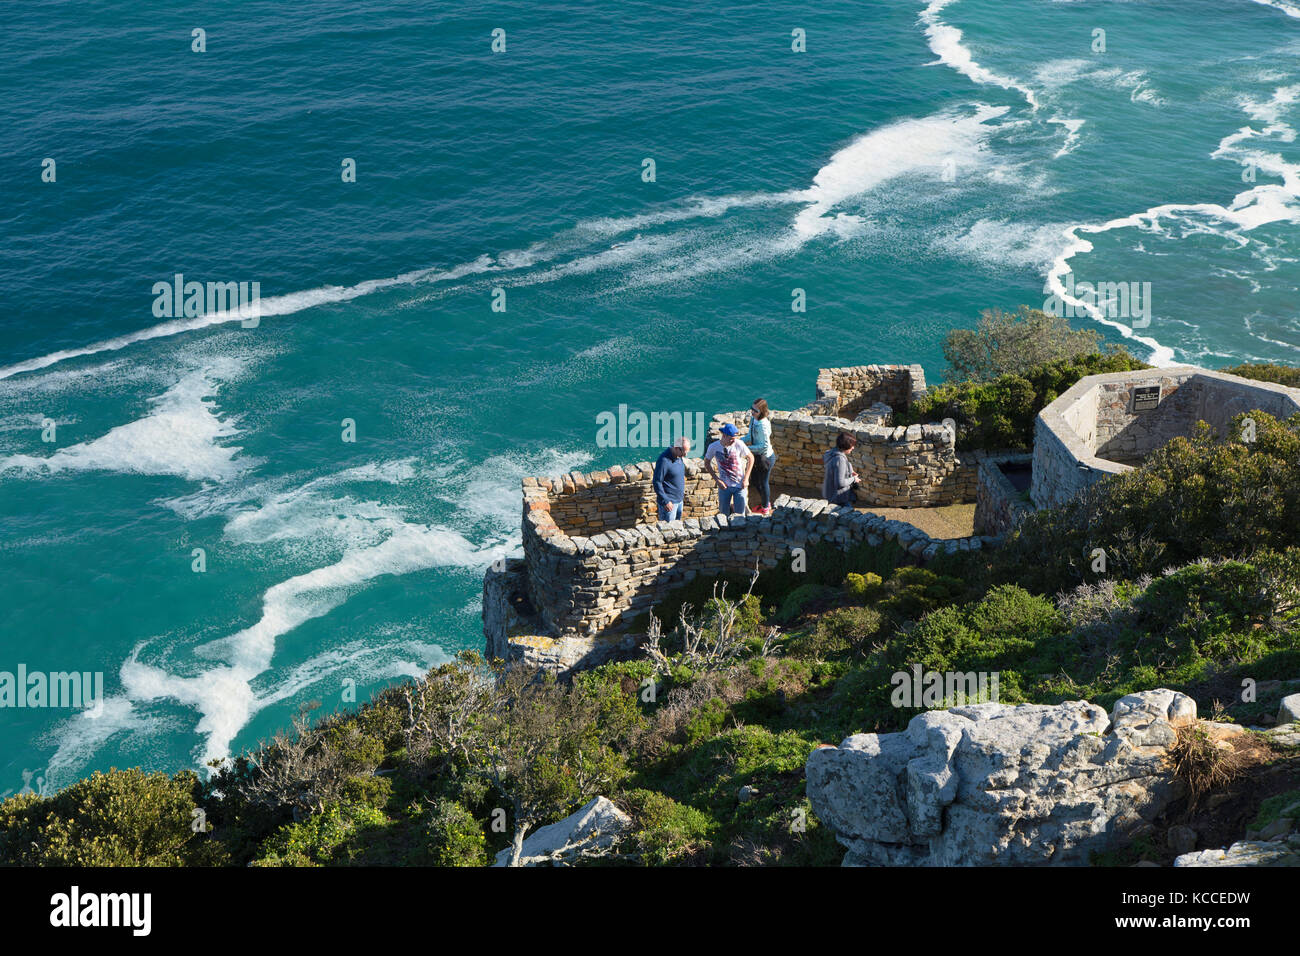 Tourists at Cape Point, Cape Point National Park, Cape Town, Western Cape, South Africa Stock Photo